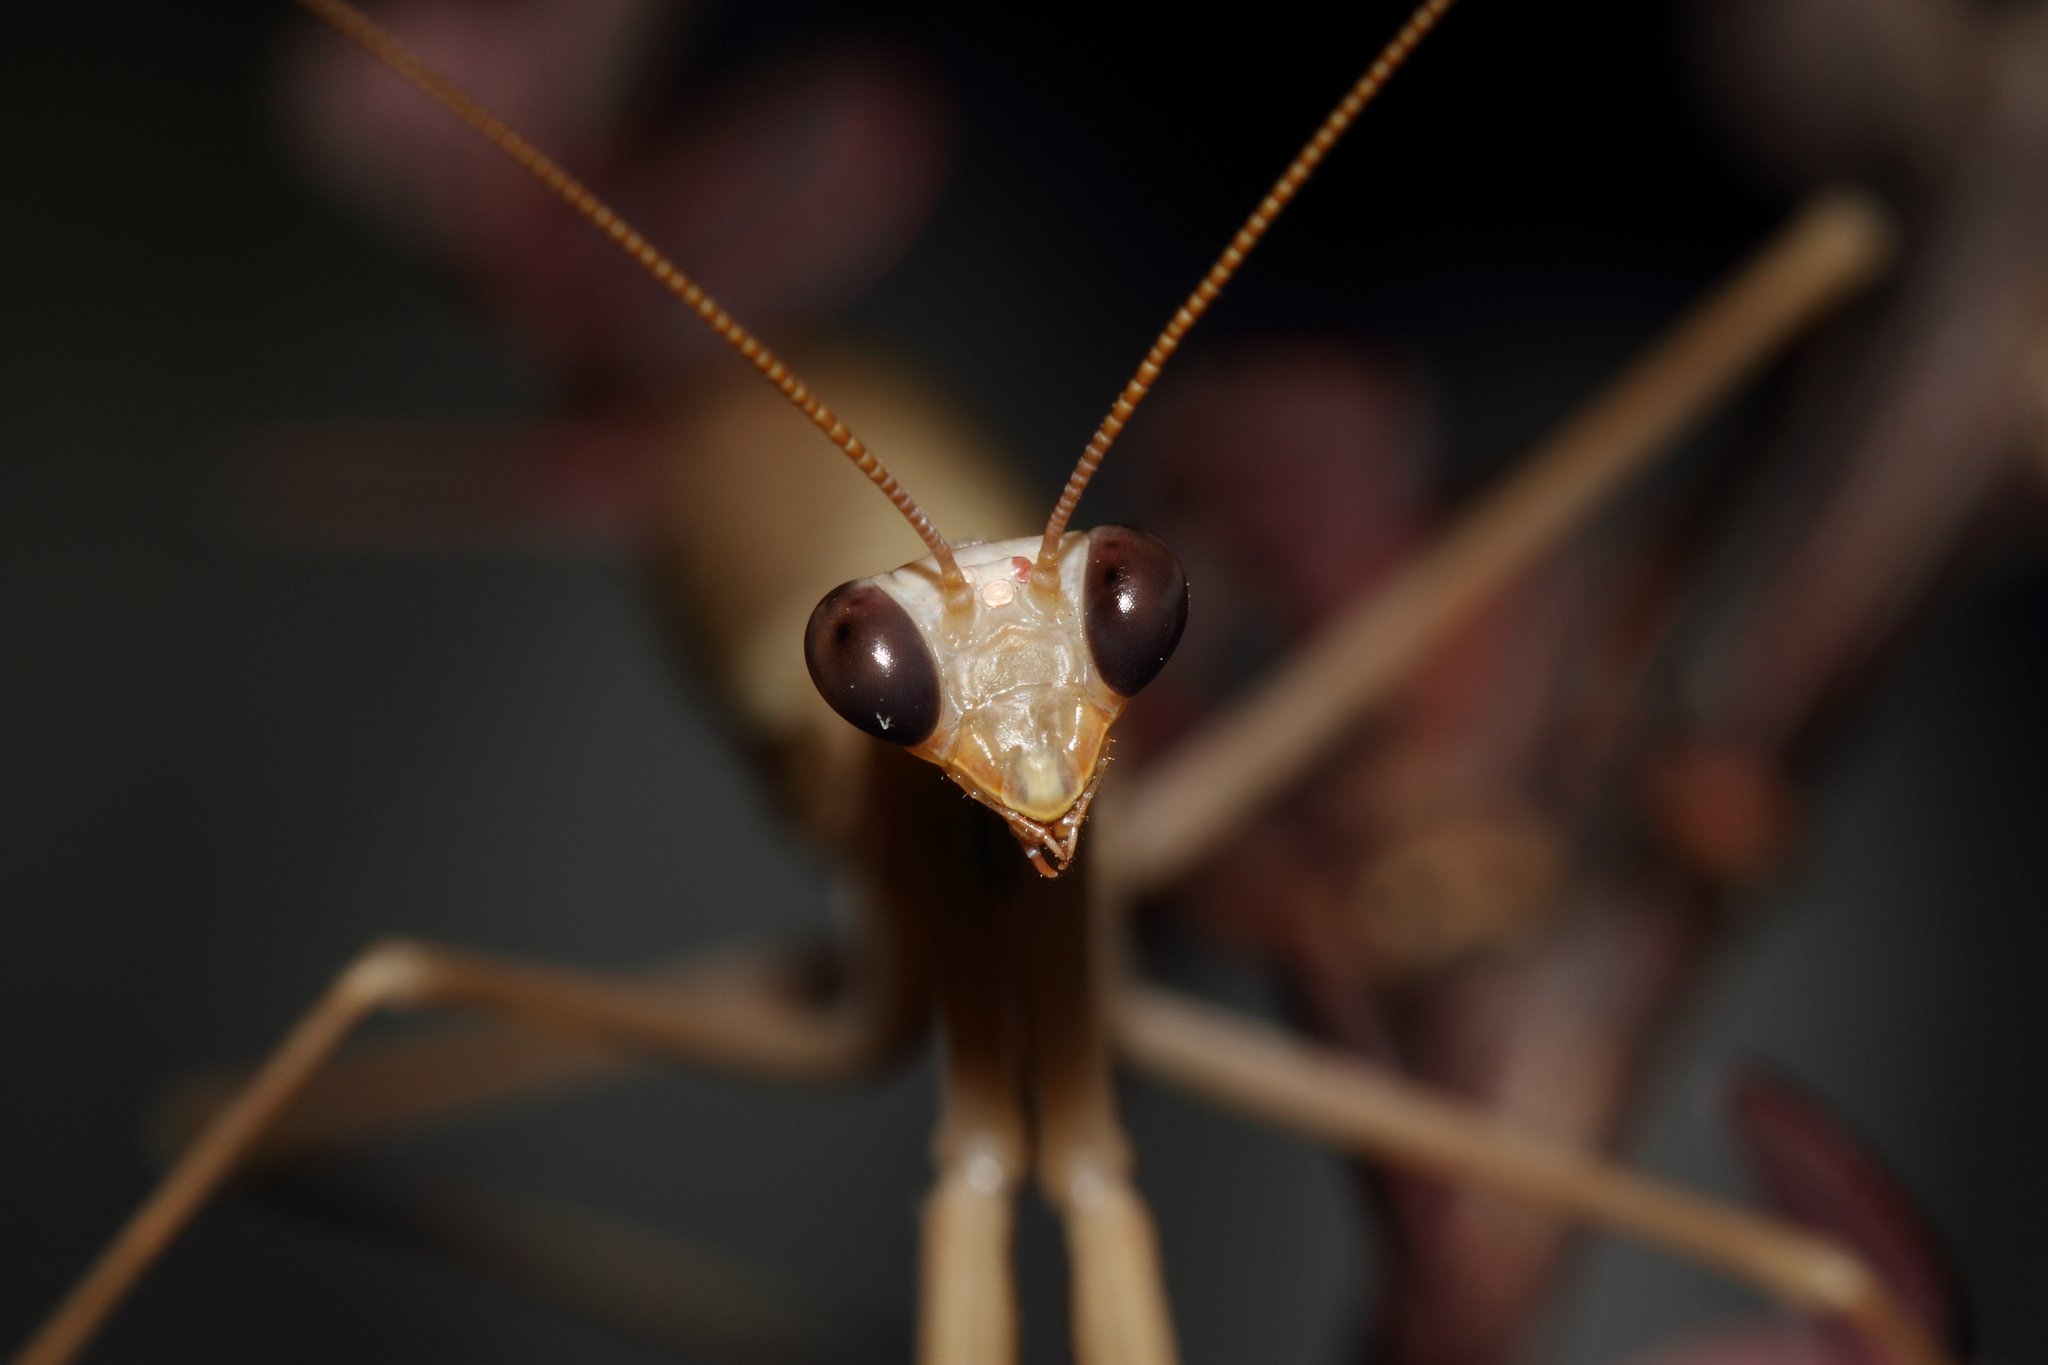 insects, Mantis, Mante, Religieuse, Nature, Macro, Closeup, Zoom Wallpaper